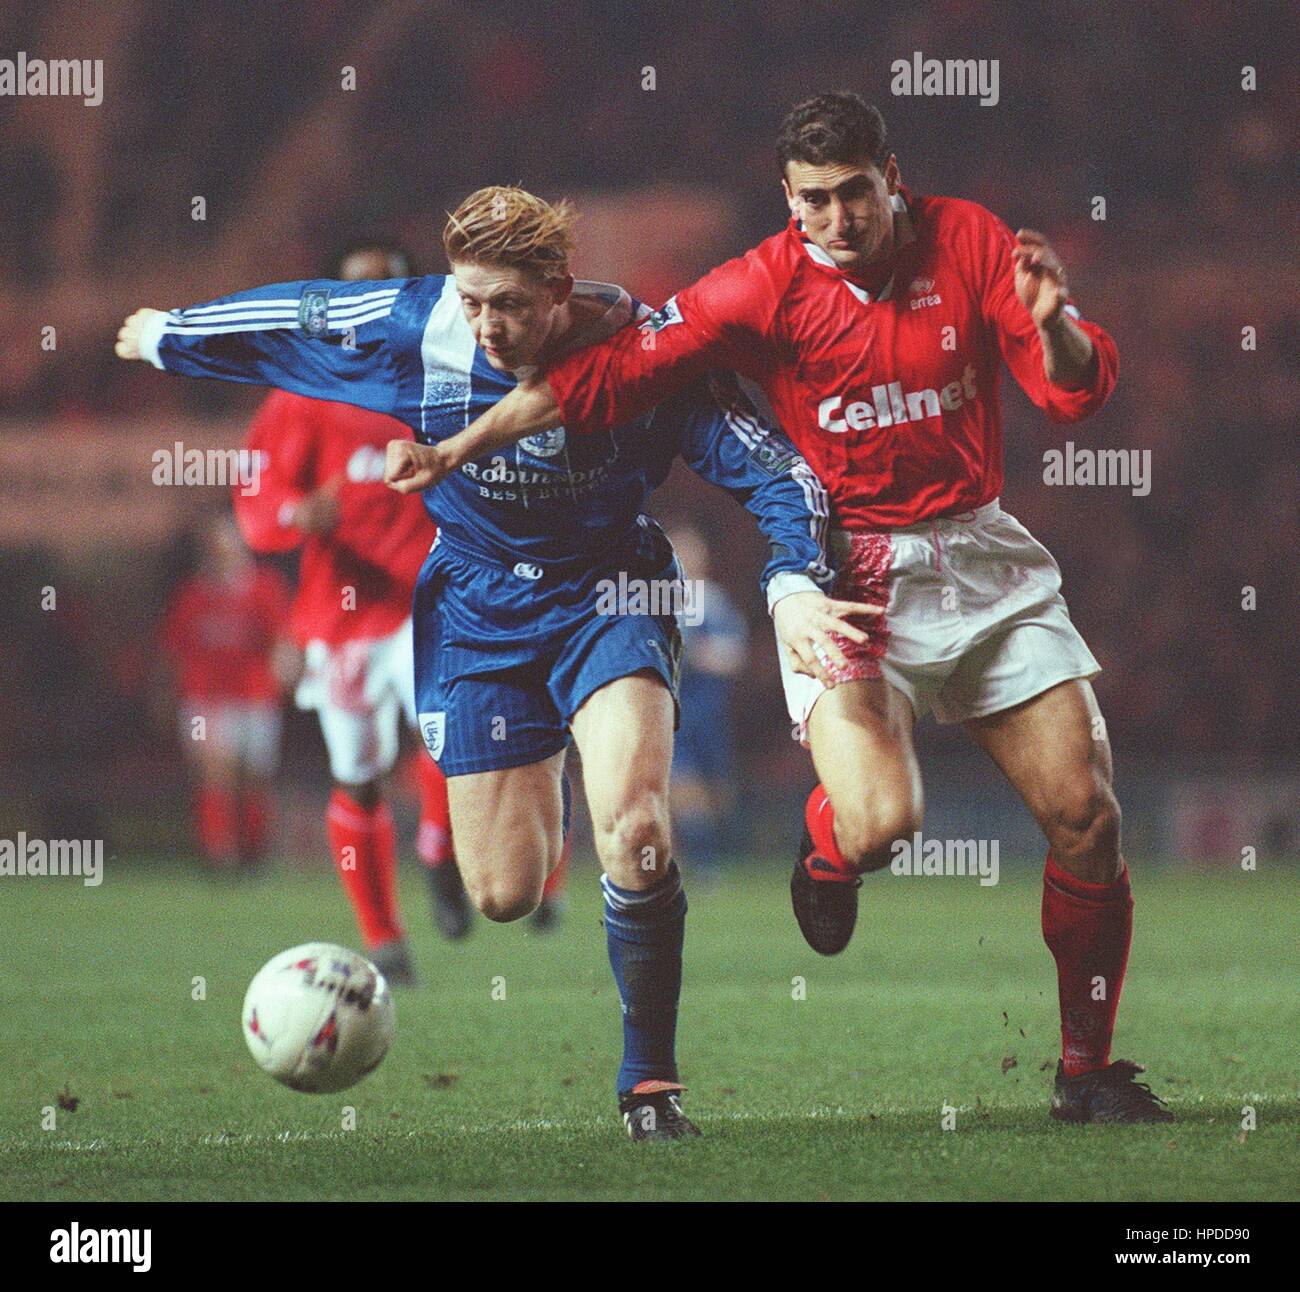 GIANLUCS FESTA ALUN ARMSTRONG MIDDLESBROUGH V STOCKPORT 12 March 1997 Stock Photo